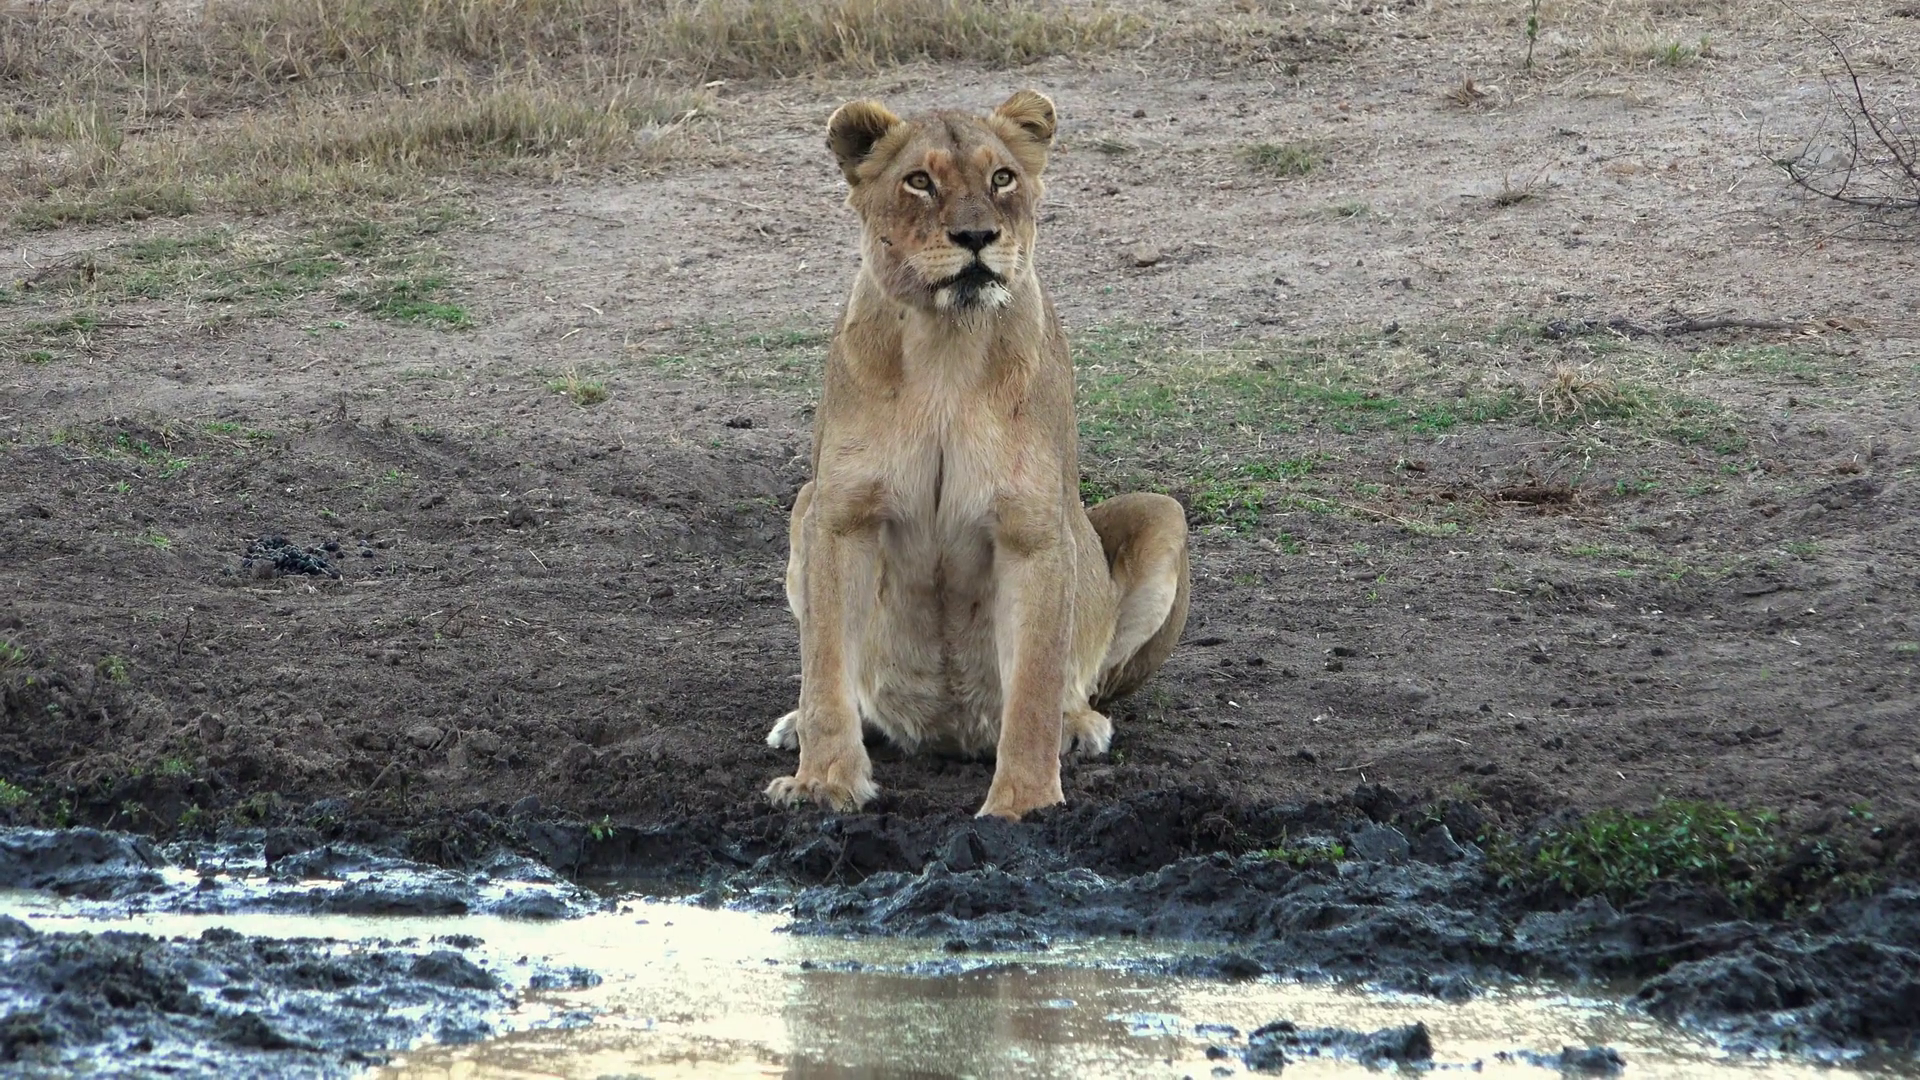 Adult lioness scans the horizon at the edge of a waterhole in Africa ...